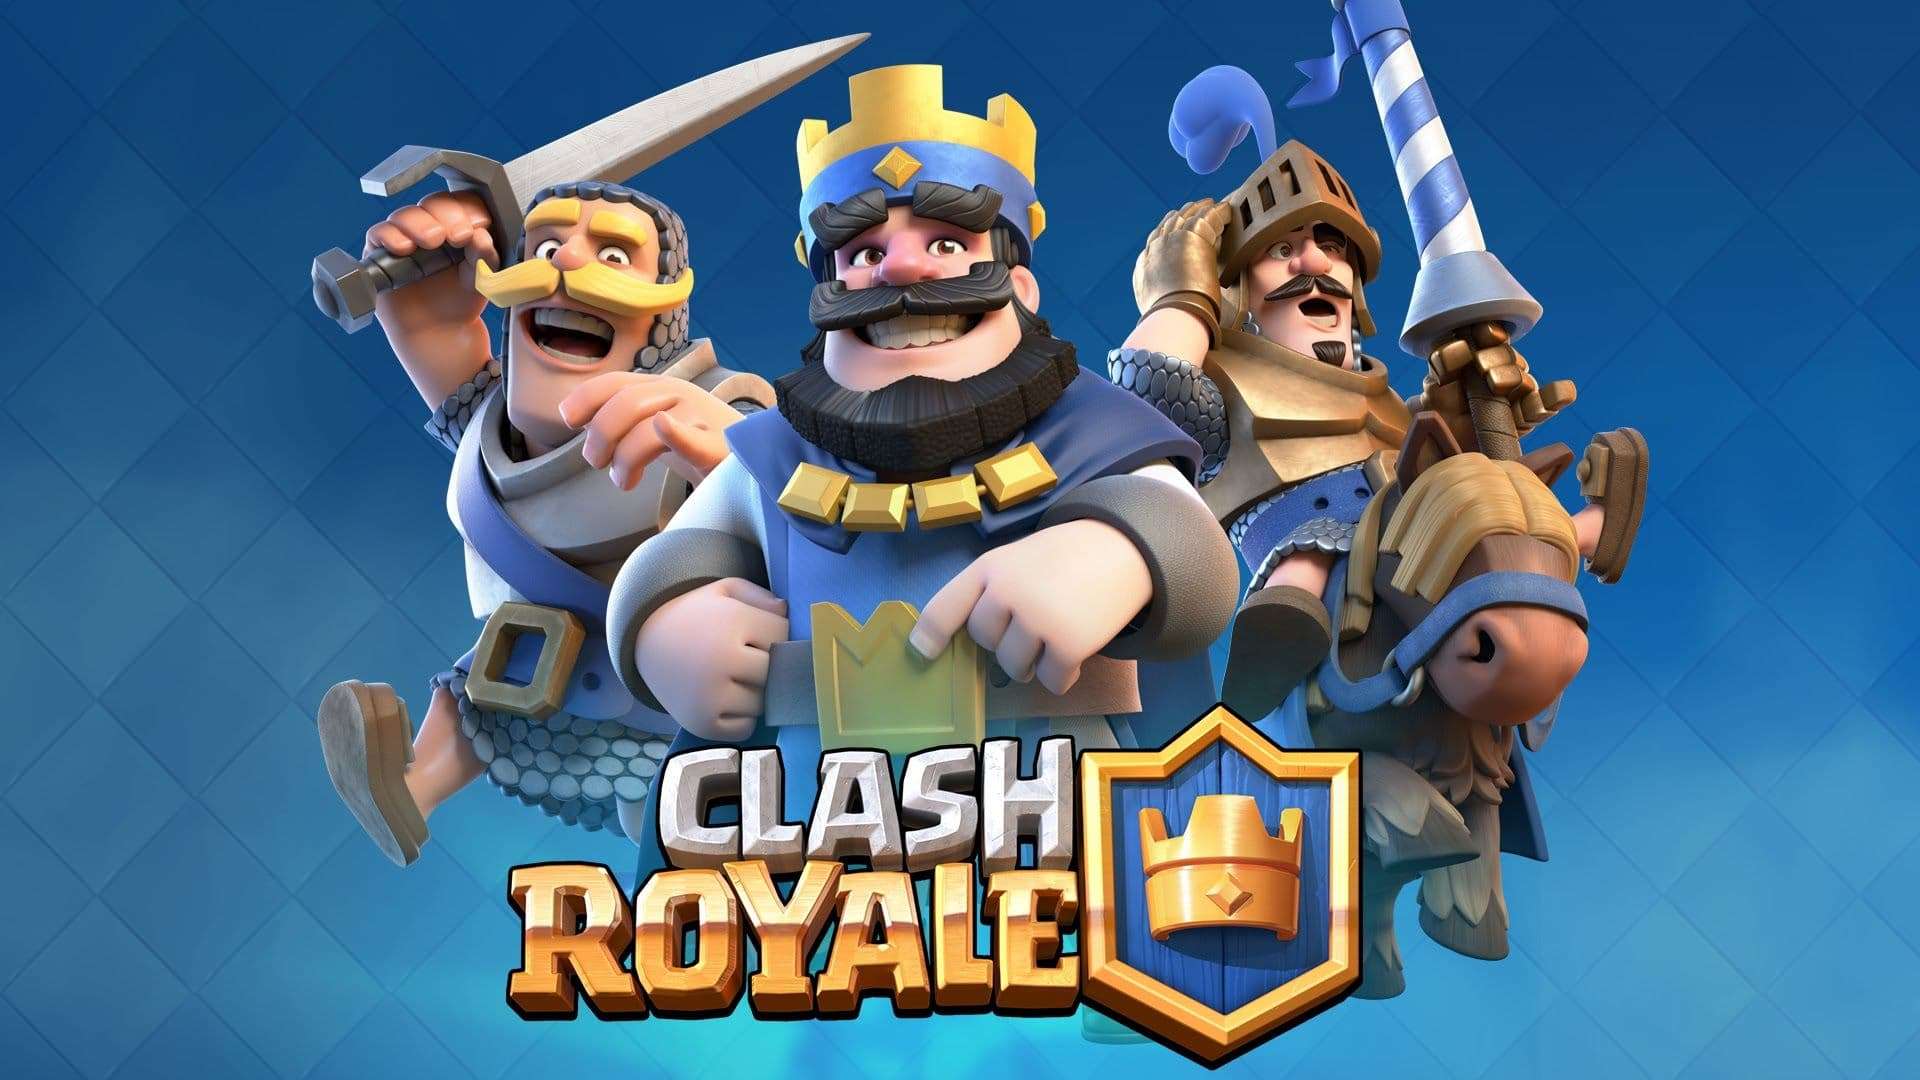 i want to play clash royale